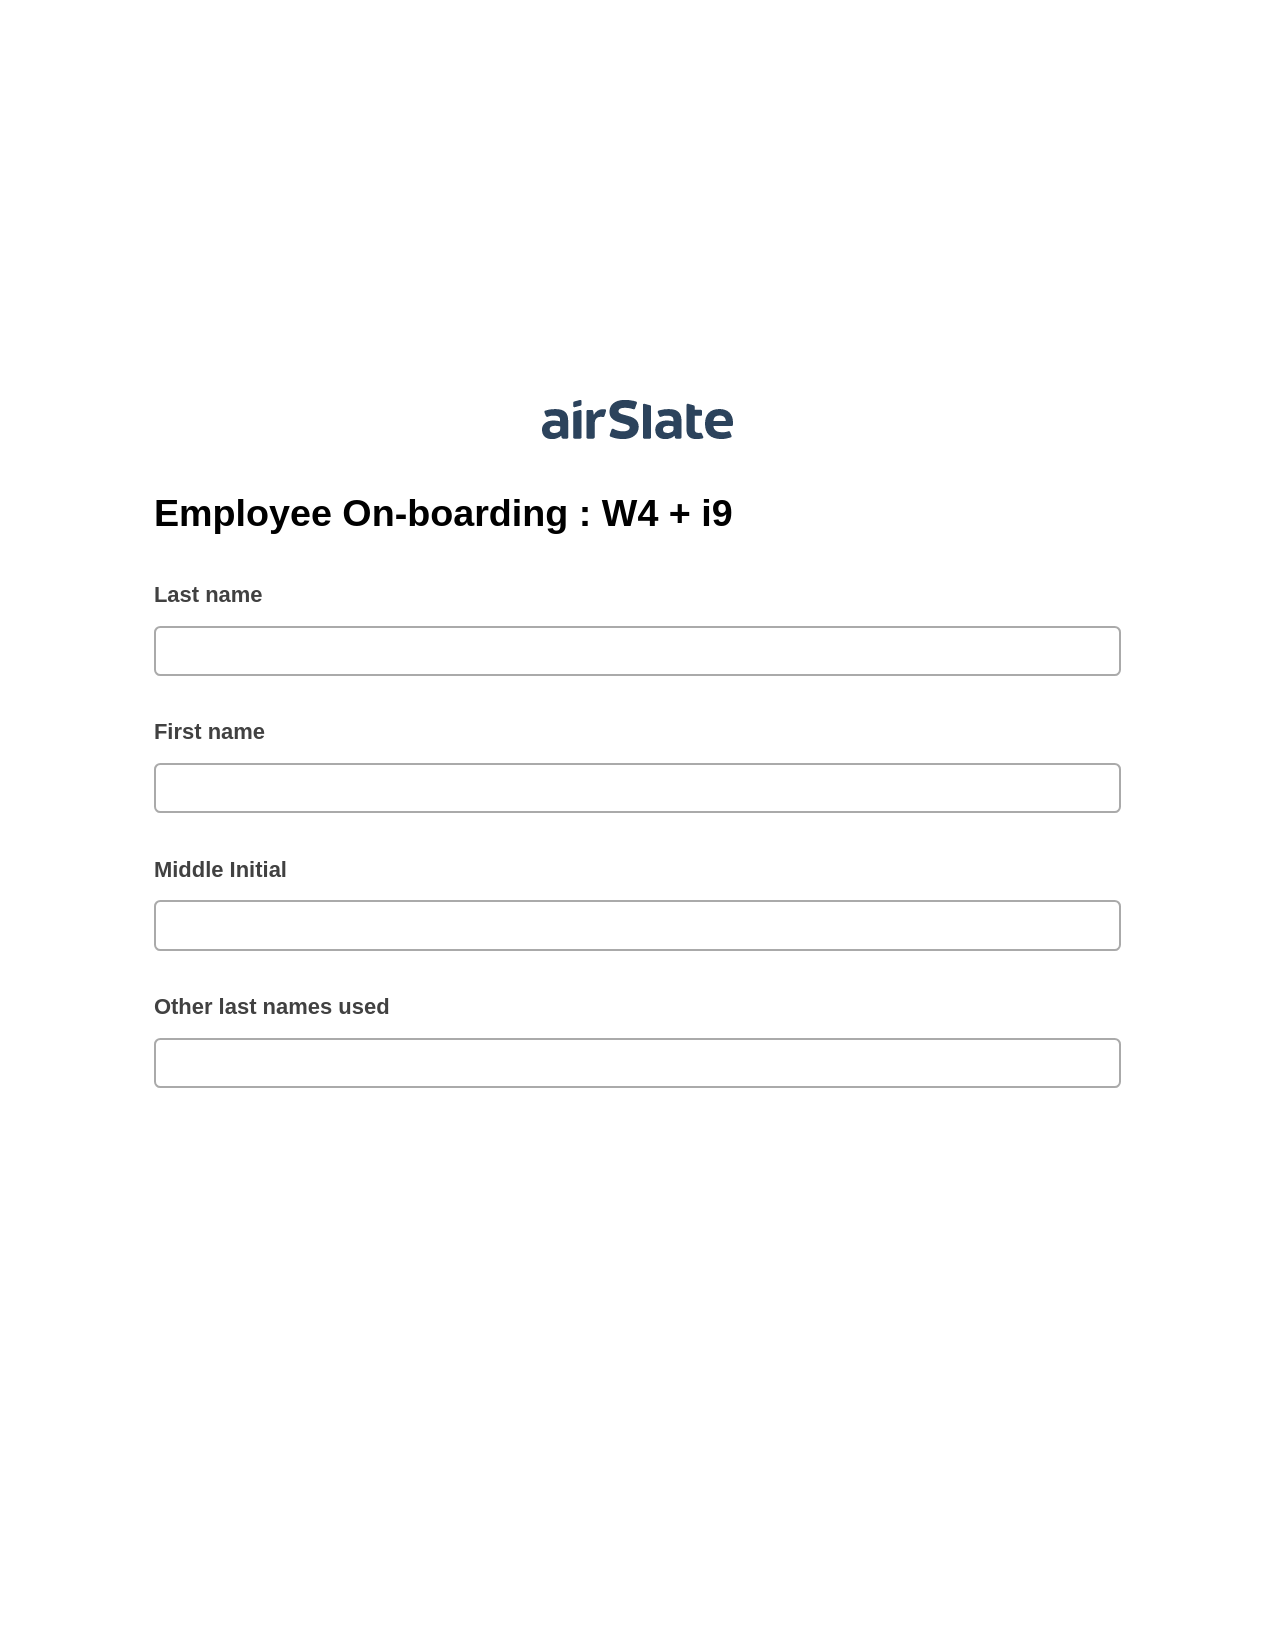 Employee On-boarding : W4 + i9 Pre-fill from Salesforce Records via SOQL Bot, Unassign Role Bot, Dropbox Bot